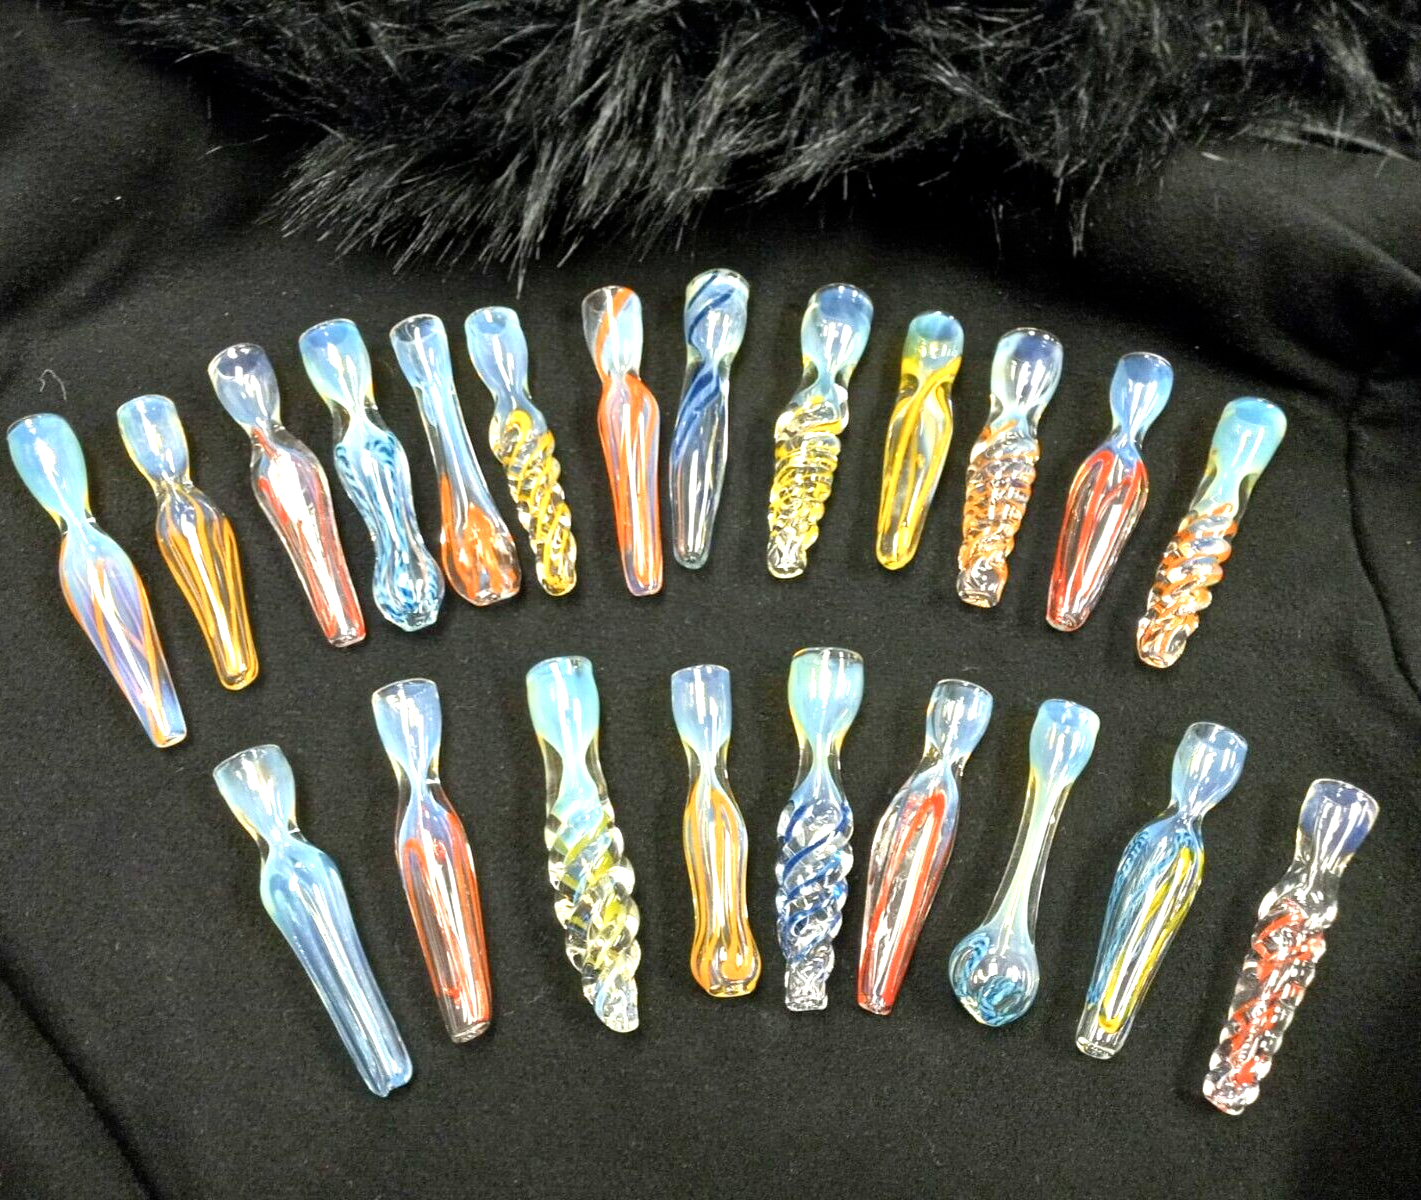 BUY ONE GET ONE FREE  TOBACCO SMOKING HAND PIPE GLASS BOWL SCREEN